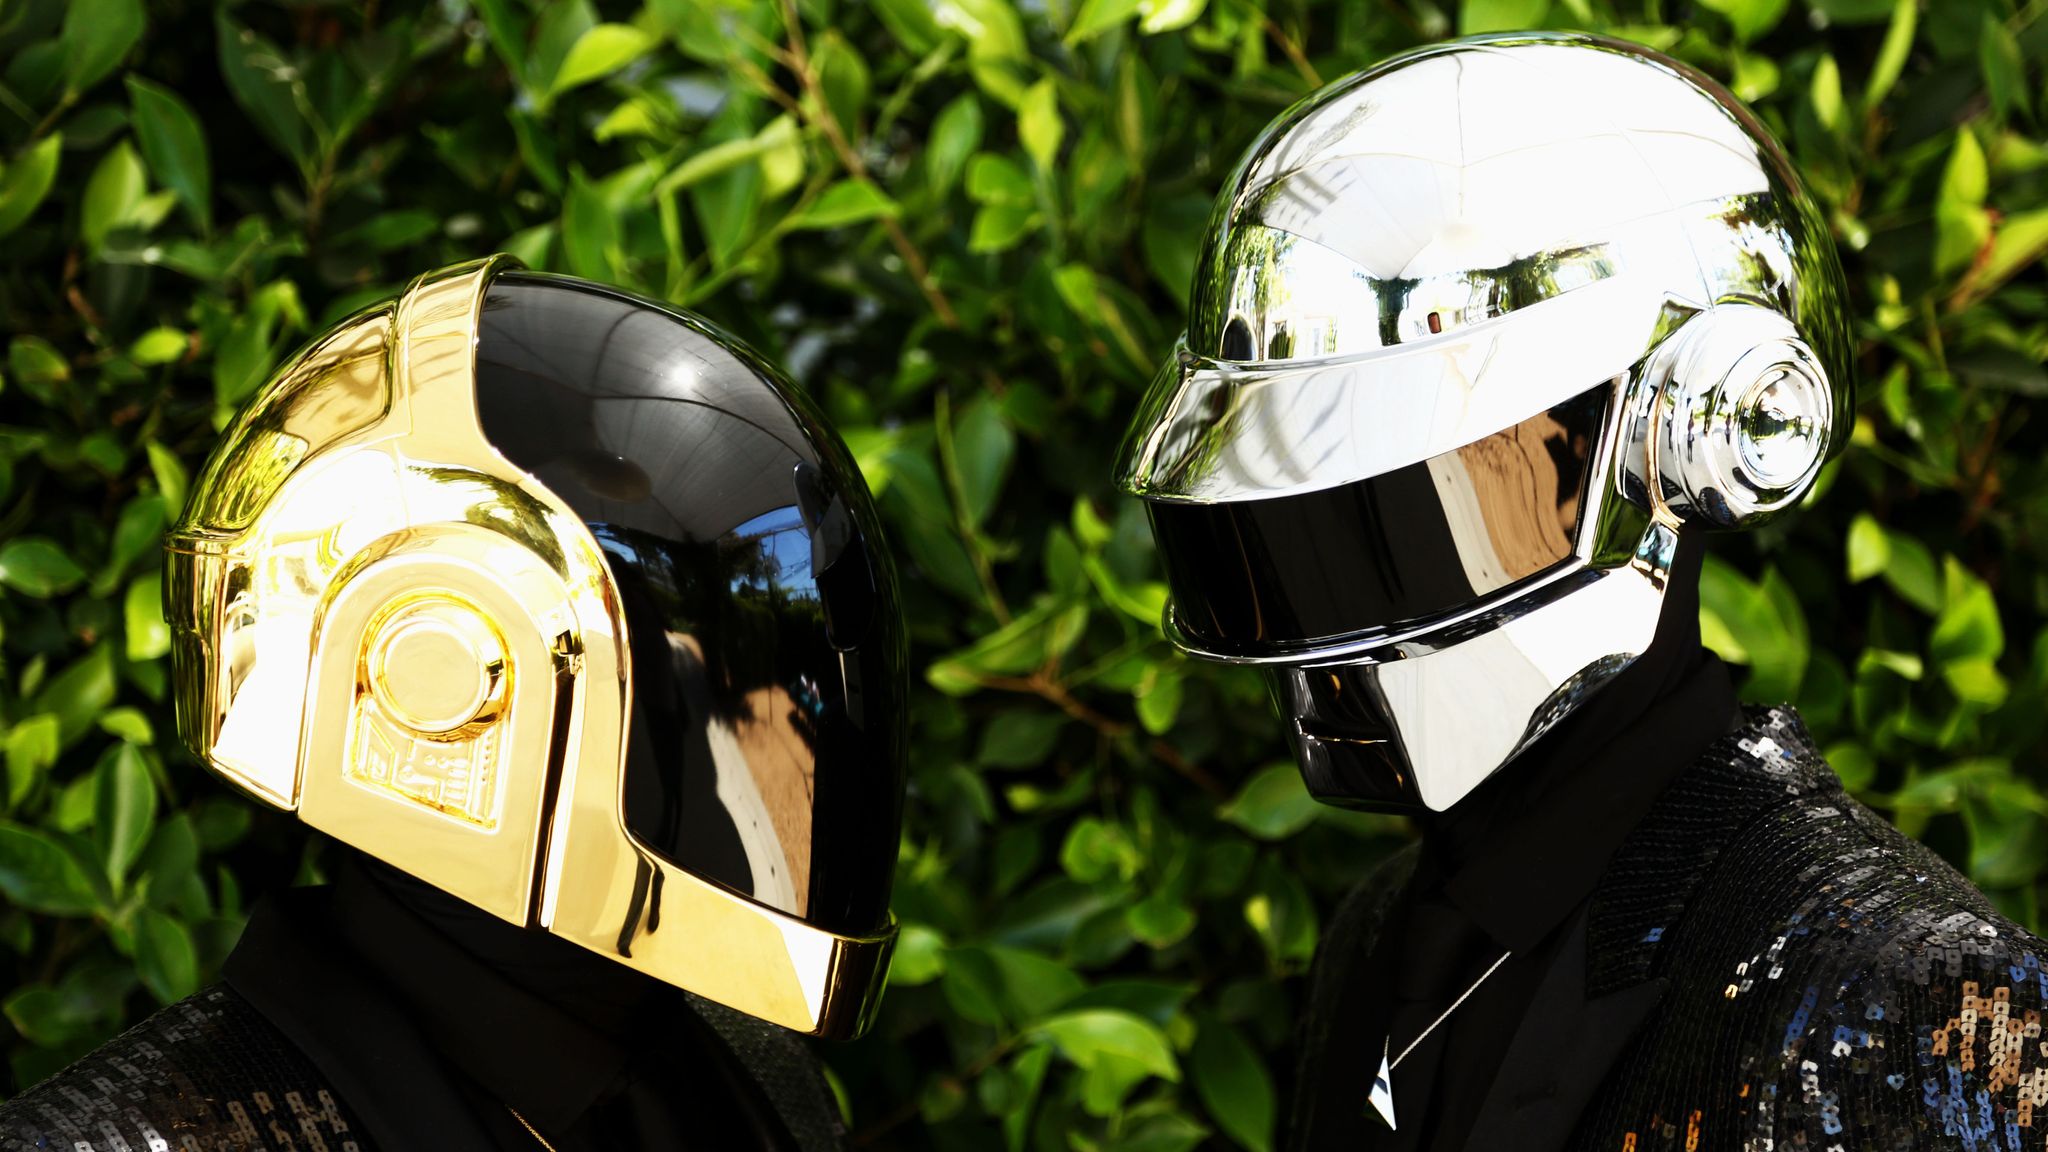 Daft Punk: French dance music duo split up after 28 years